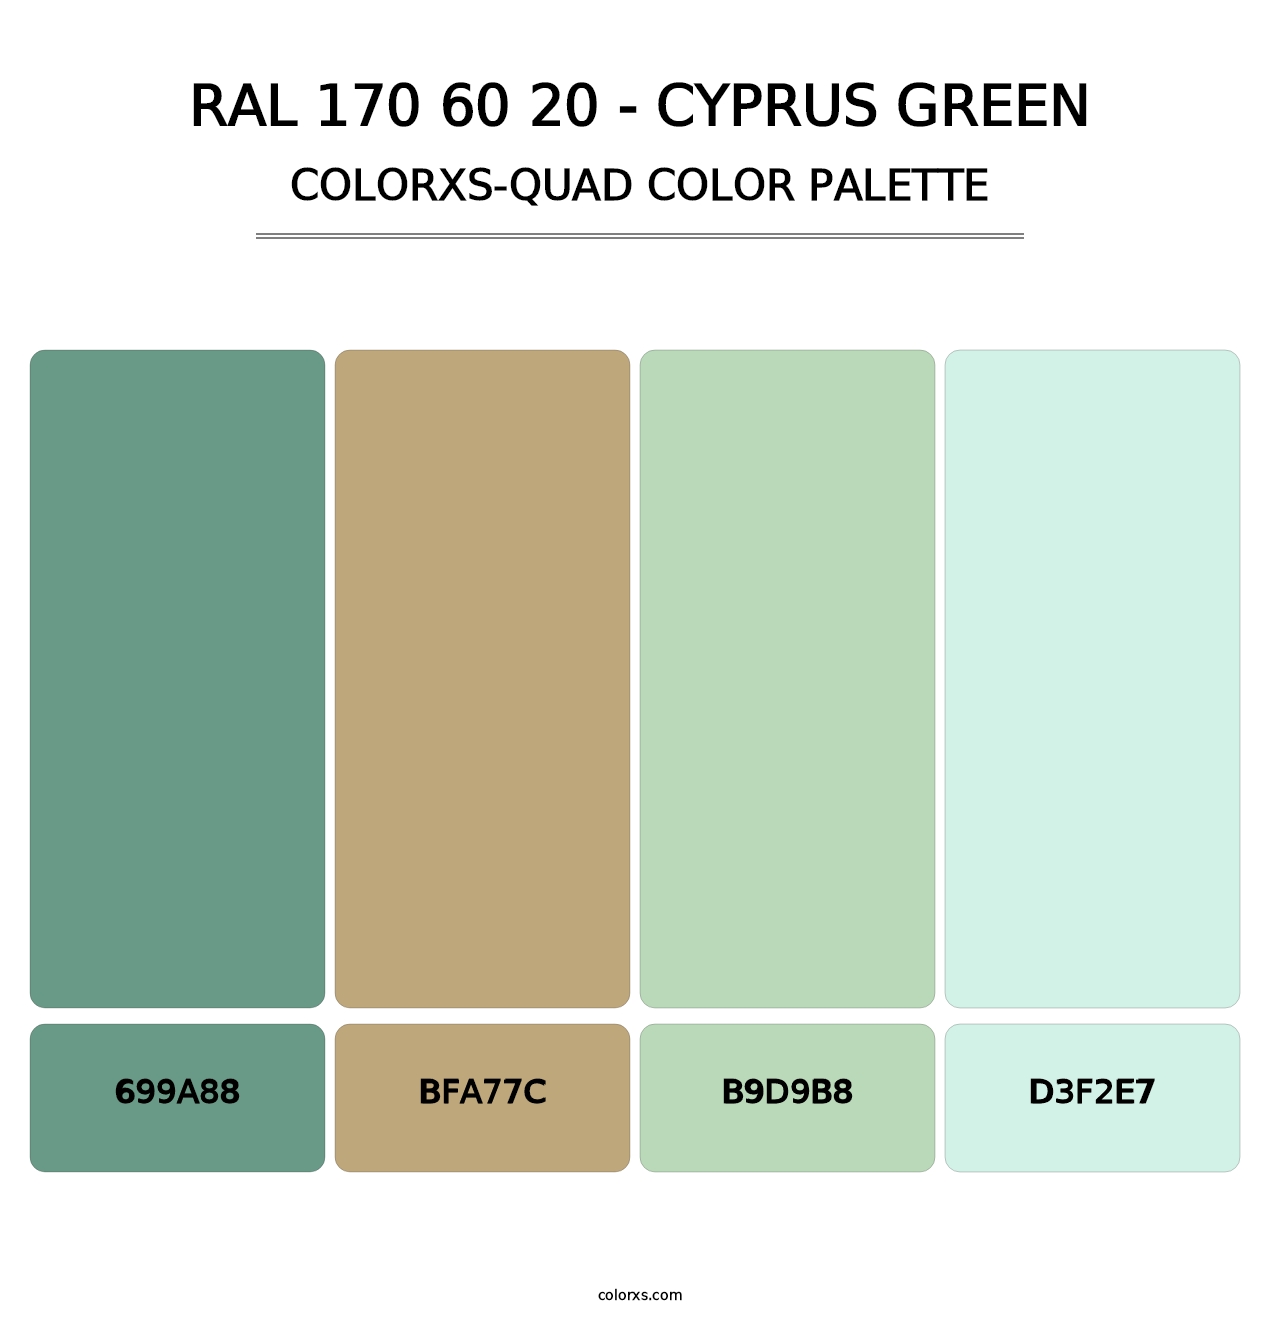 RAL 170 60 20 - Cyprus Green - Colorxs Quad Palette